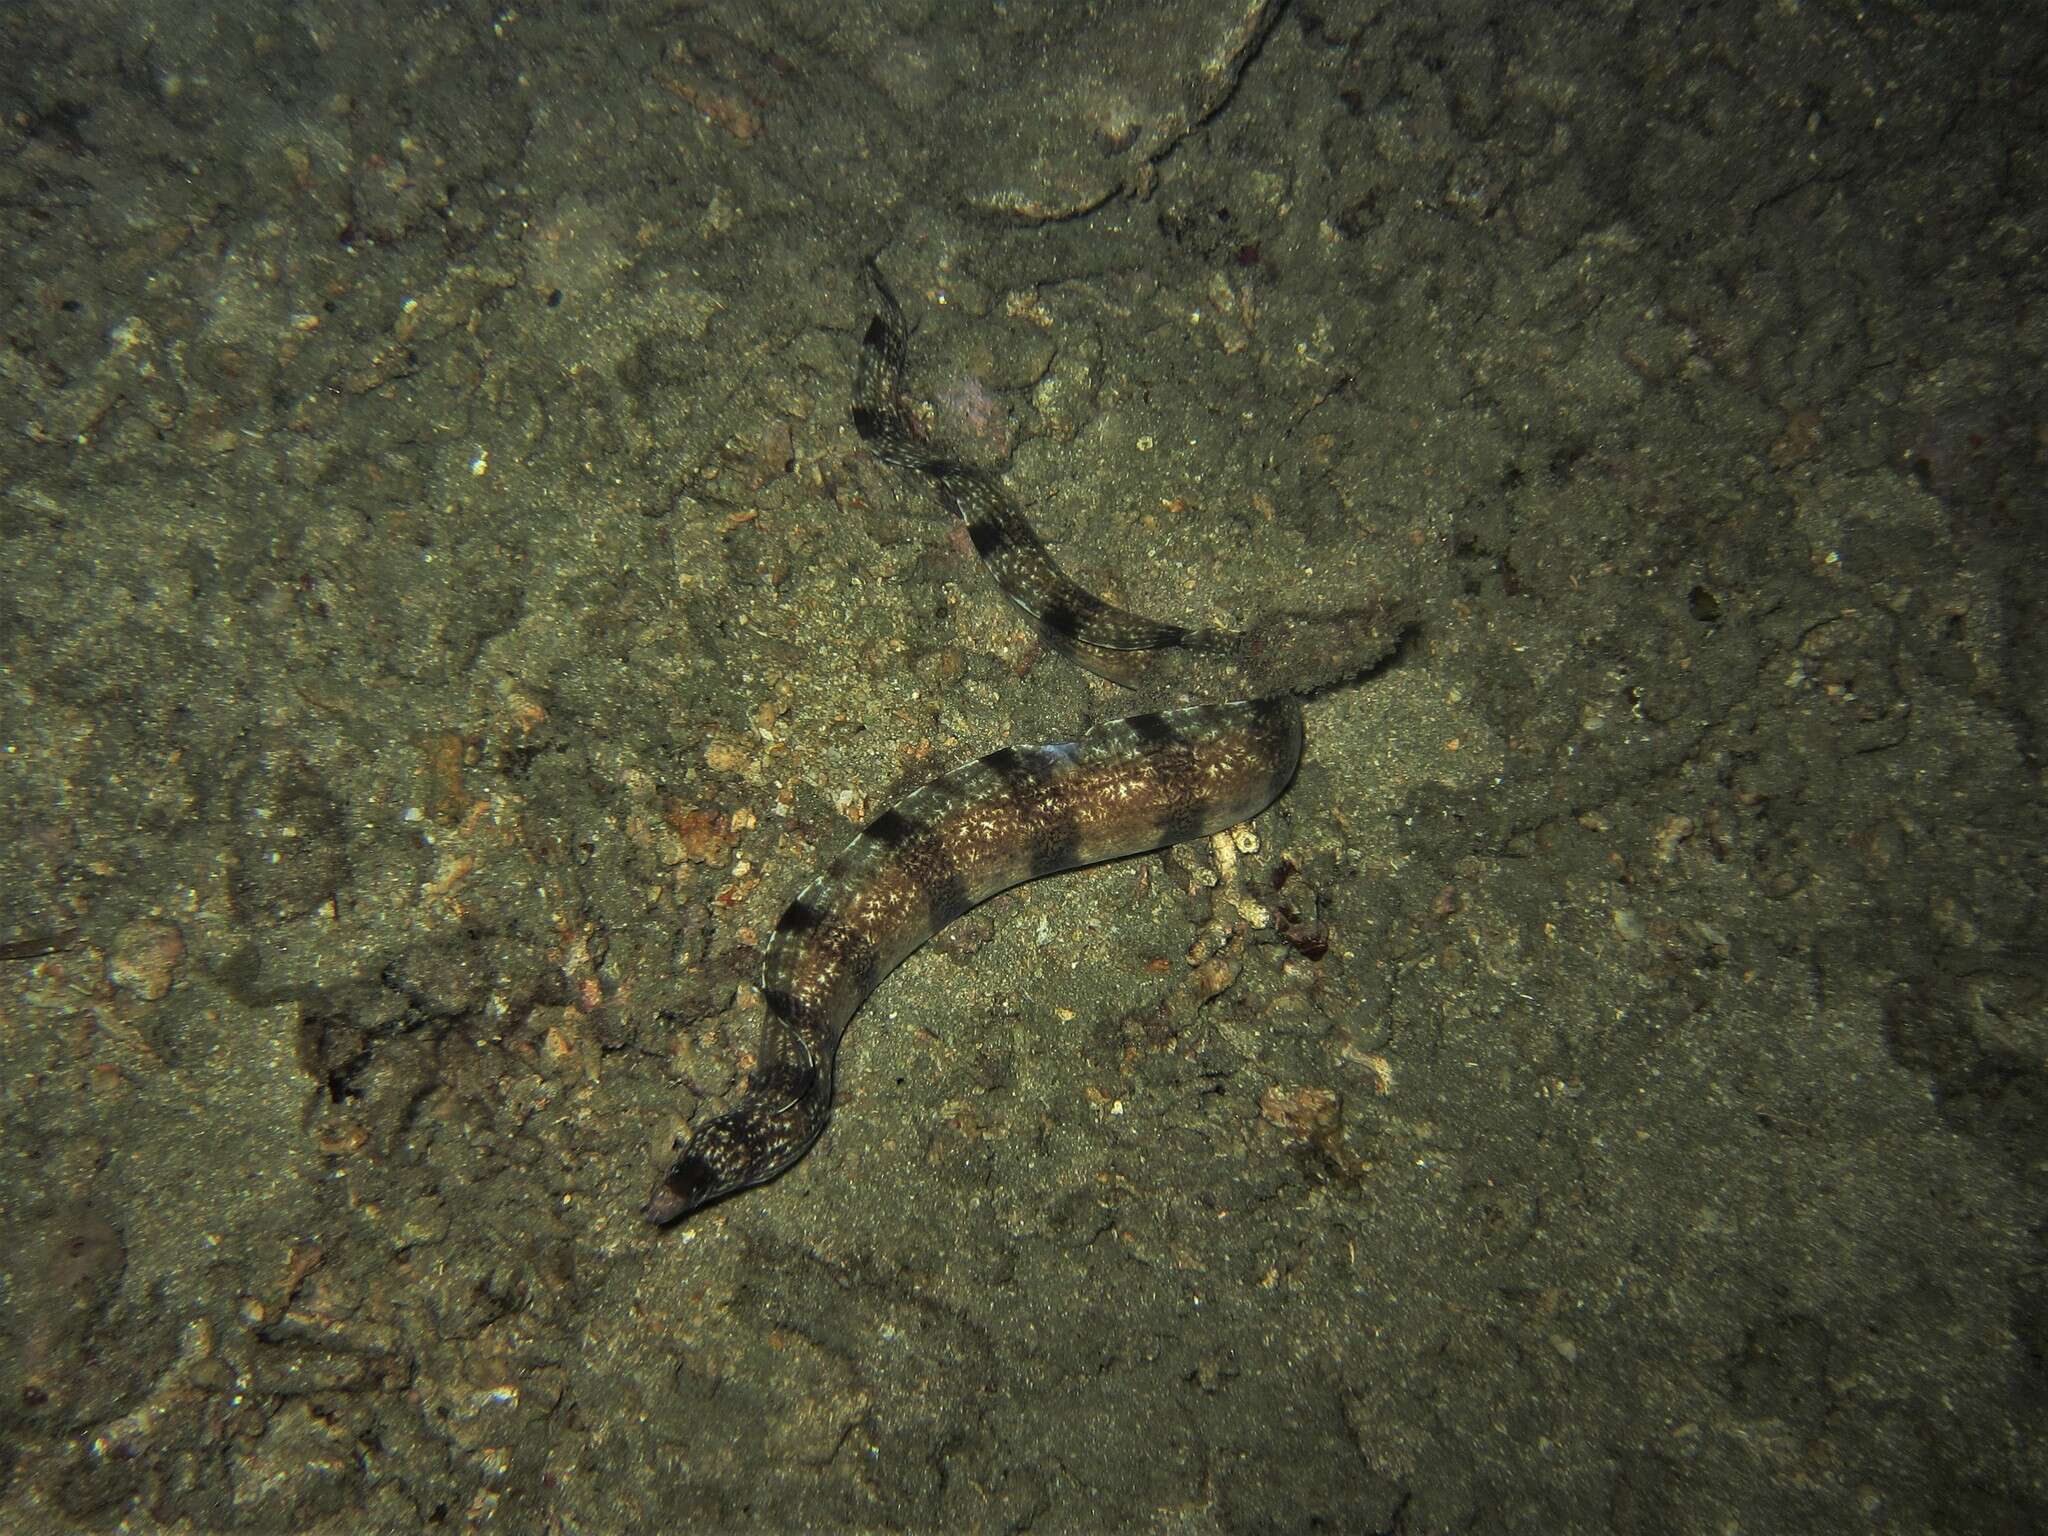 Image of Banded moray